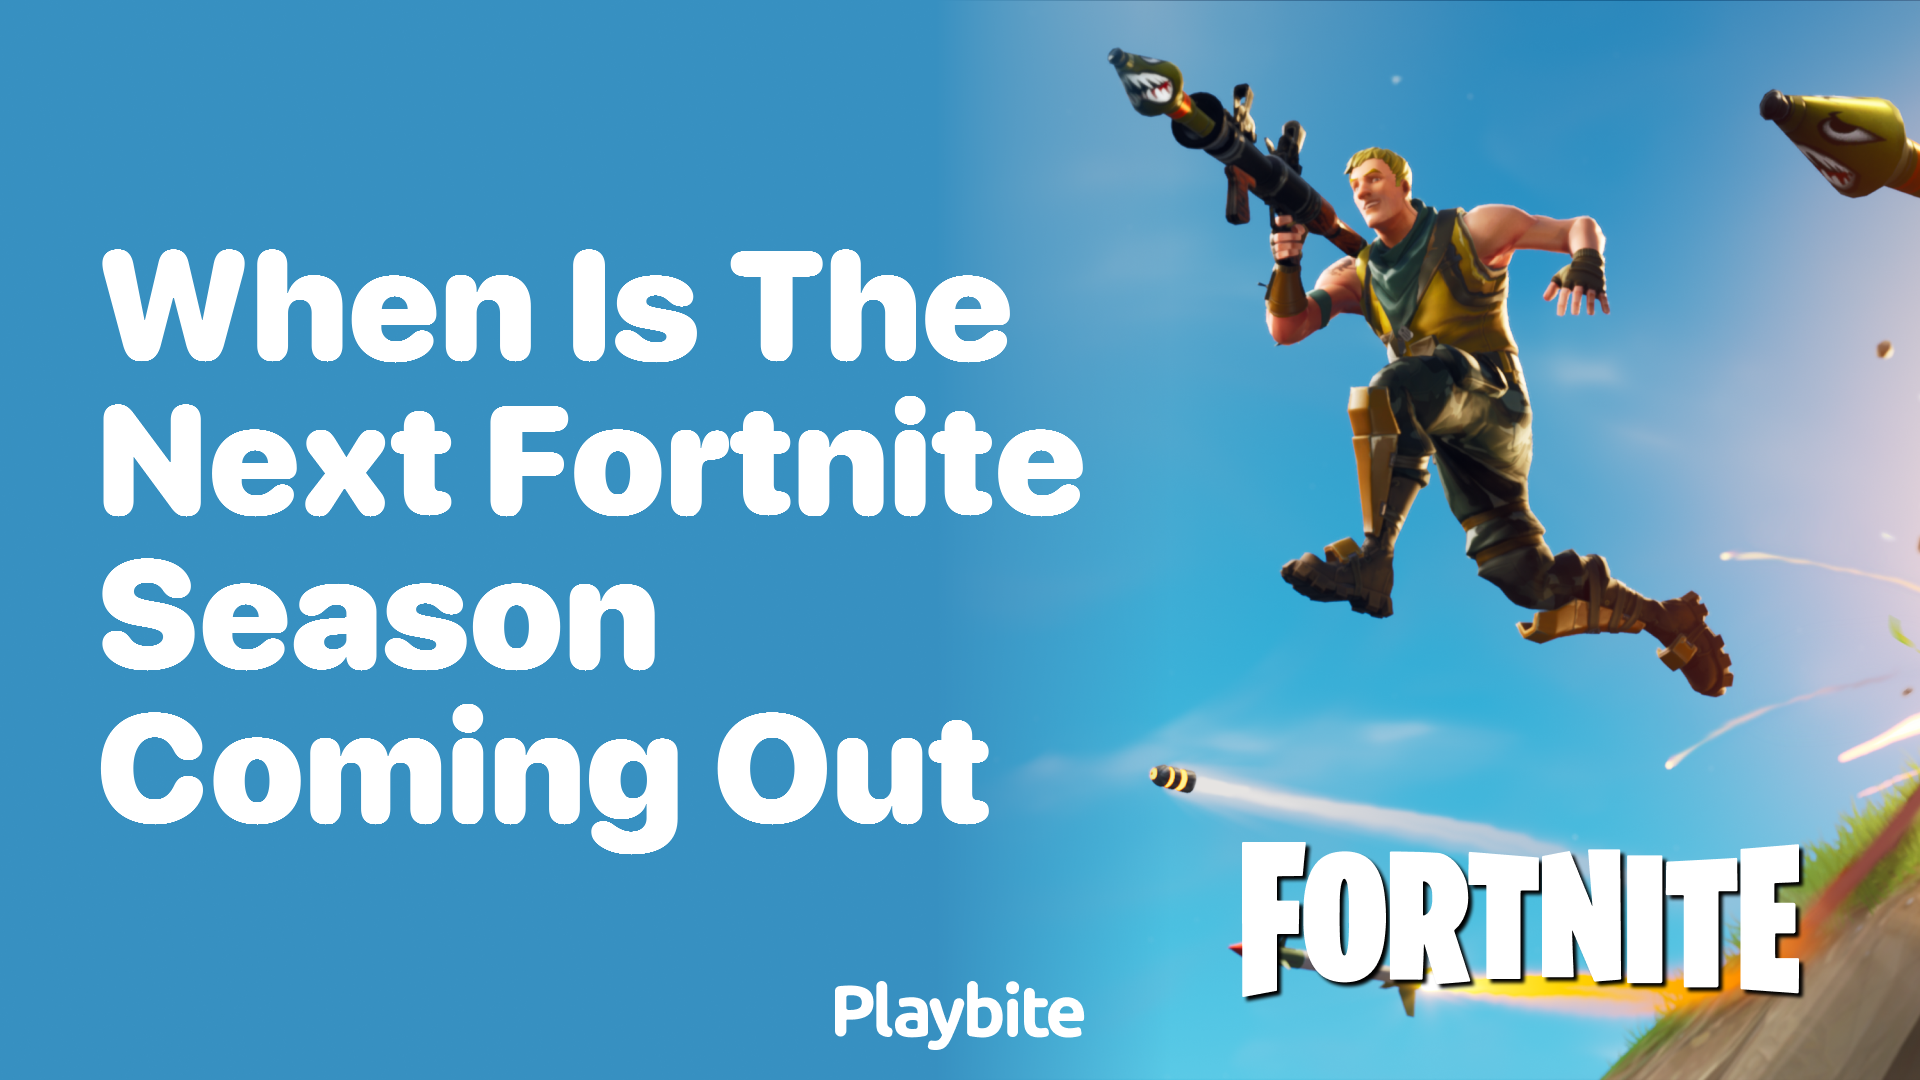 When Is the Next Fortnite Season Coming Out? Get Ready for More Action!